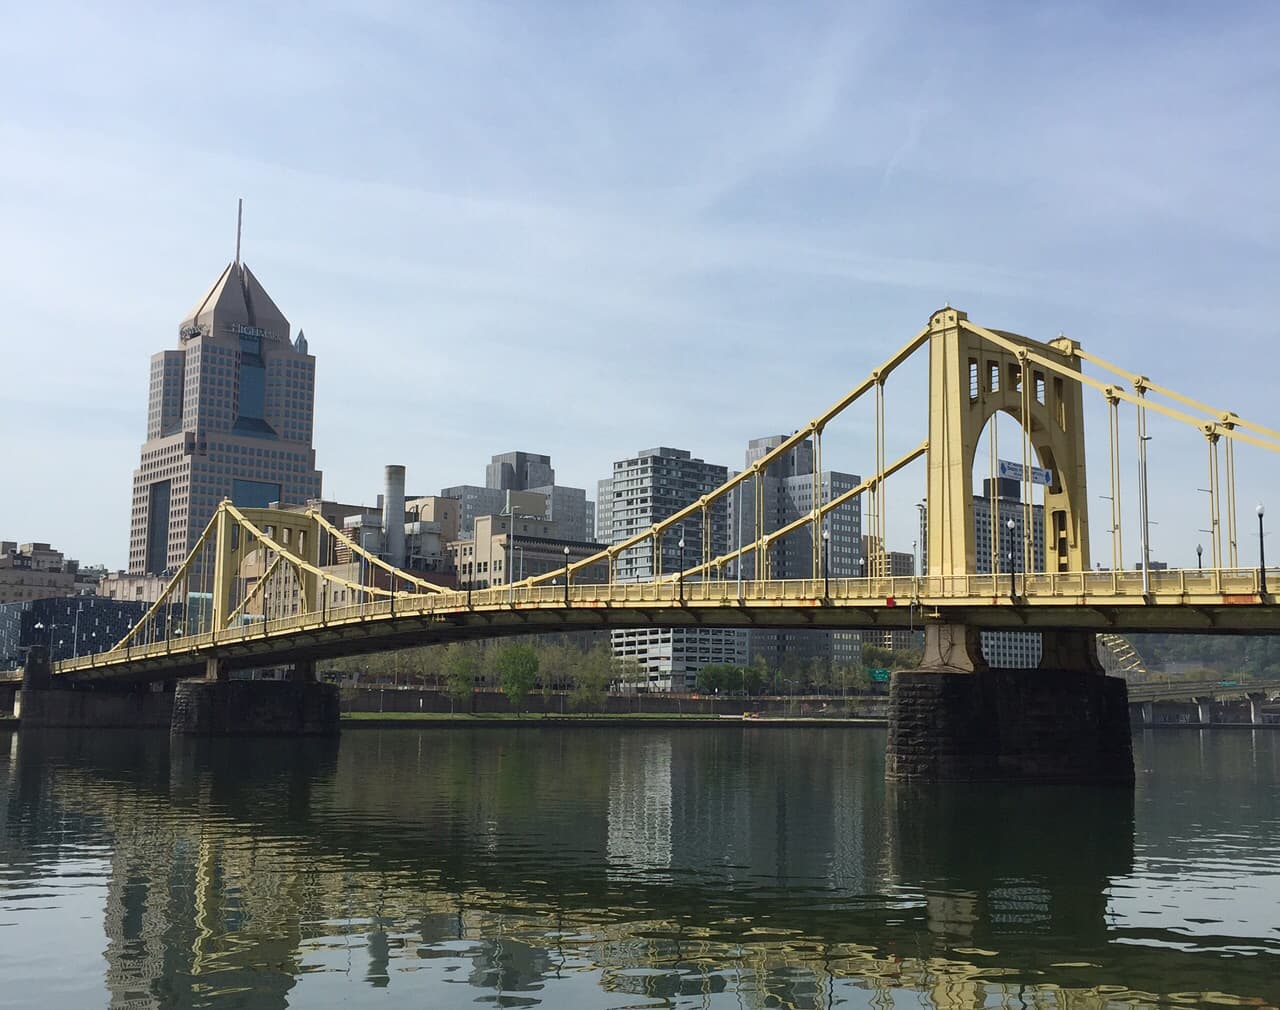 Andy Warhol Bridge over the Allegheny River, Pittsburgh 